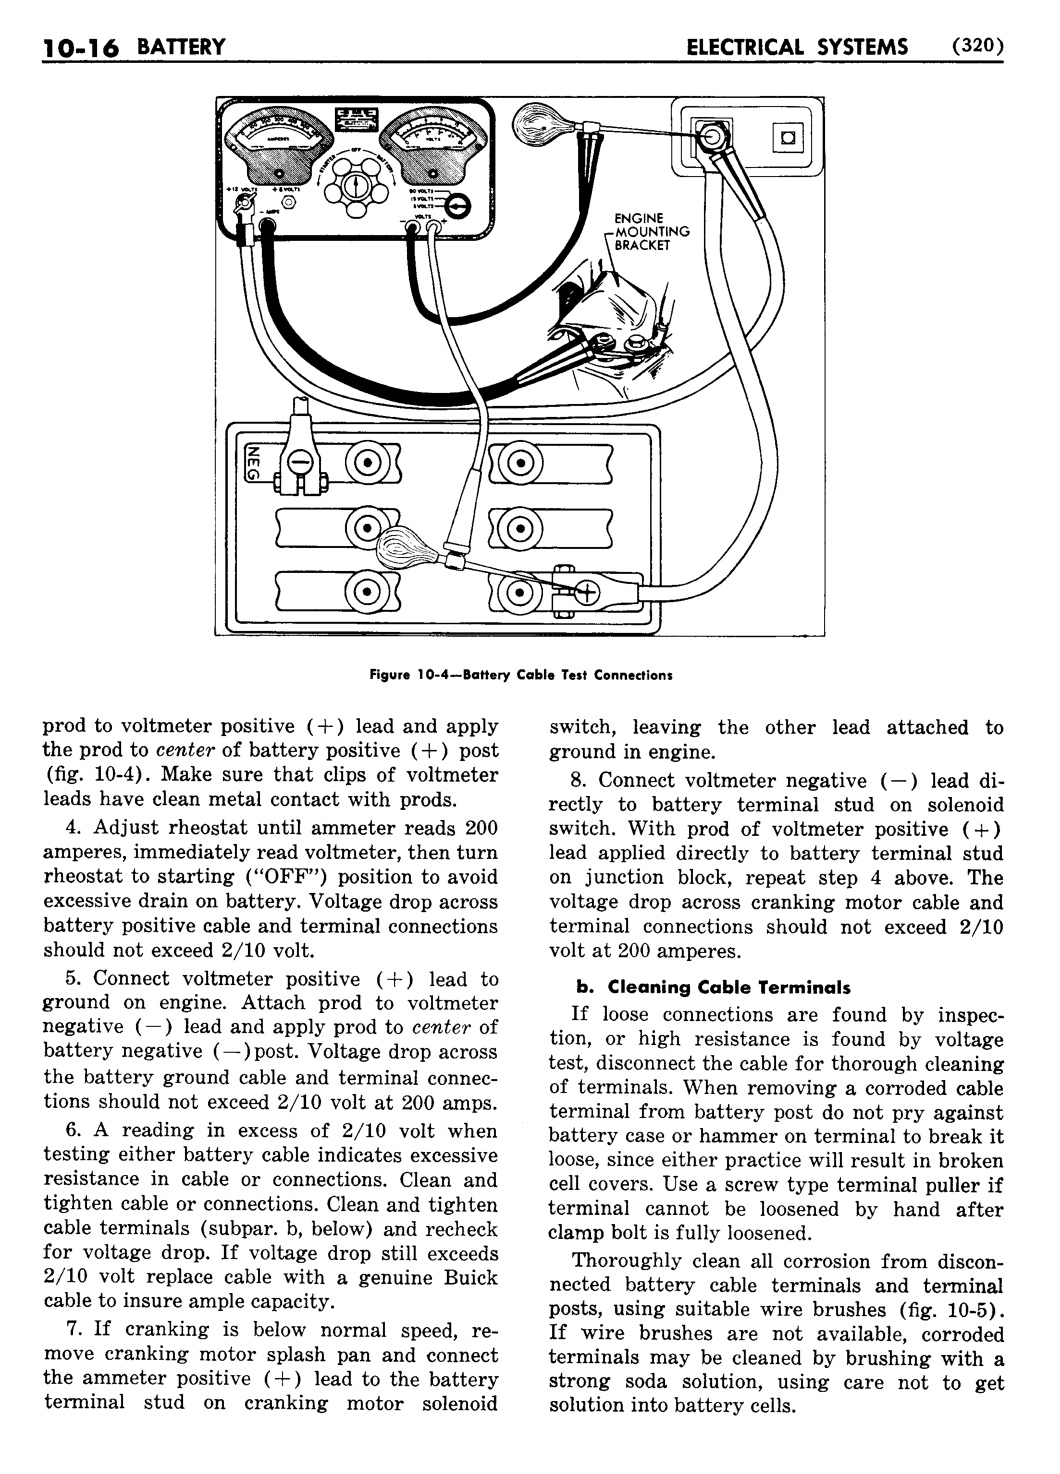 n_11 1955 Buick Shop Manual - Electrical Systems-016-016.jpg